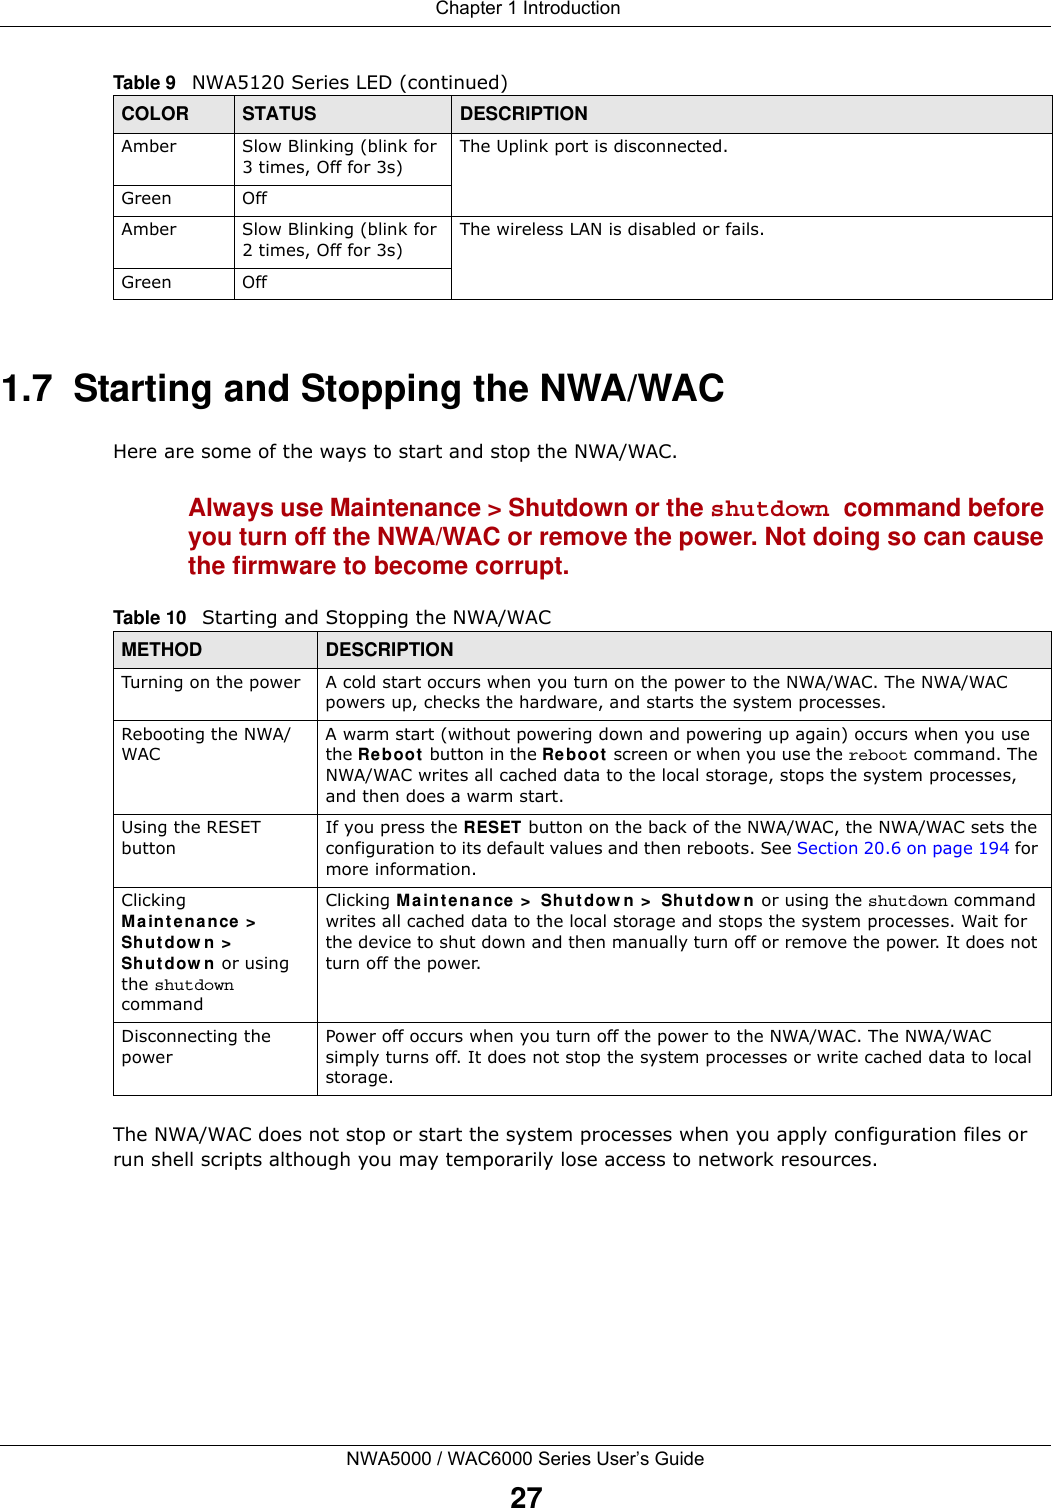  Chapter 1 IntroductionNWA5000 / WAC6000 Series User’s Guide271.7  Starting and Stopping the NWA/WACHere are some of the ways to start and stop the NWA/WAC.Always use Maintenance &gt; Shutdown or the shutdown command before you turn off the NWA/WAC or remove the power. Not doing so can cause the firmware to become corrupt. The NWA/WAC does not stop or start the system processes when you apply configuration files or run shell scripts although you may temporarily lose access to network resources.Amber Slow Blinking (blink for 3 times, Off for 3s)The Uplink port is disconnected.Green OffAmber Slow Blinking (blink for 2 times, Off for 3s)The wireless LAN is disabled or fails.Green OffTable 9   NWA5120 Series LED (continued)COLOR STATUS DESCRIPTIONTable 10   Starting and Stopping the NWA/WACMETHOD DESCRIPTIONTurning on the power A cold start occurs when you turn on the power to the NWA/WAC. The NWA/WAC powers up, checks the hardware, and starts the system processes.Rebooting the NWA/WACA warm start (without powering down and powering up again) occurs when you use the Reboot button in the Reboot screen or when you use the reboot command. The NWA/WAC writes all cached data to the local storage, stops the system processes, and then does a warm start. Using the RESET buttonIf you press the RESET button on the back of the NWA/WAC, the NWA/WAC sets the configuration to its default values and then reboots. See Section 20.6 on page 194 for more information.Clicking Maintenance &gt; Shutdown &gt; Shutdown or using the shutdown commandClicking Maintenance &gt; Shutdown &gt; Shutdown or using the shutdown command writes all cached data to the local storage and stops the system processes. Wait for the device to shut down and then manually turn off or remove the power. It does not turn off the power. Disconnecting the powerPower off occurs when you turn off the power to the NWA/WAC. The NWA/WAC simply turns off. It does not stop the system processes or write cached data to local storage. 